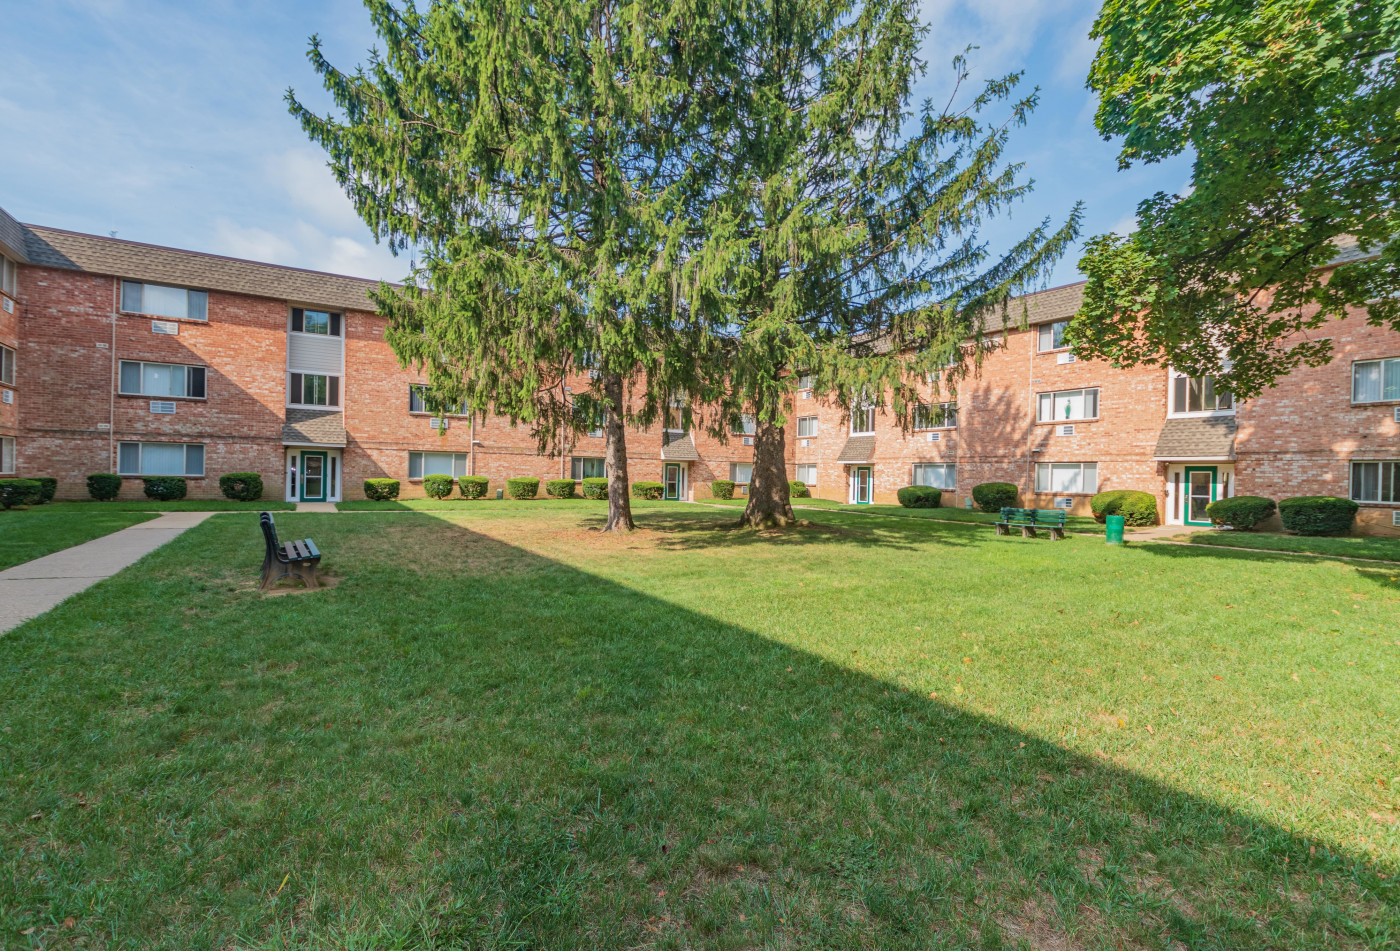 Swimming Pool | Apartment Homes in Penndel, PA | Millcreek Village Apartments